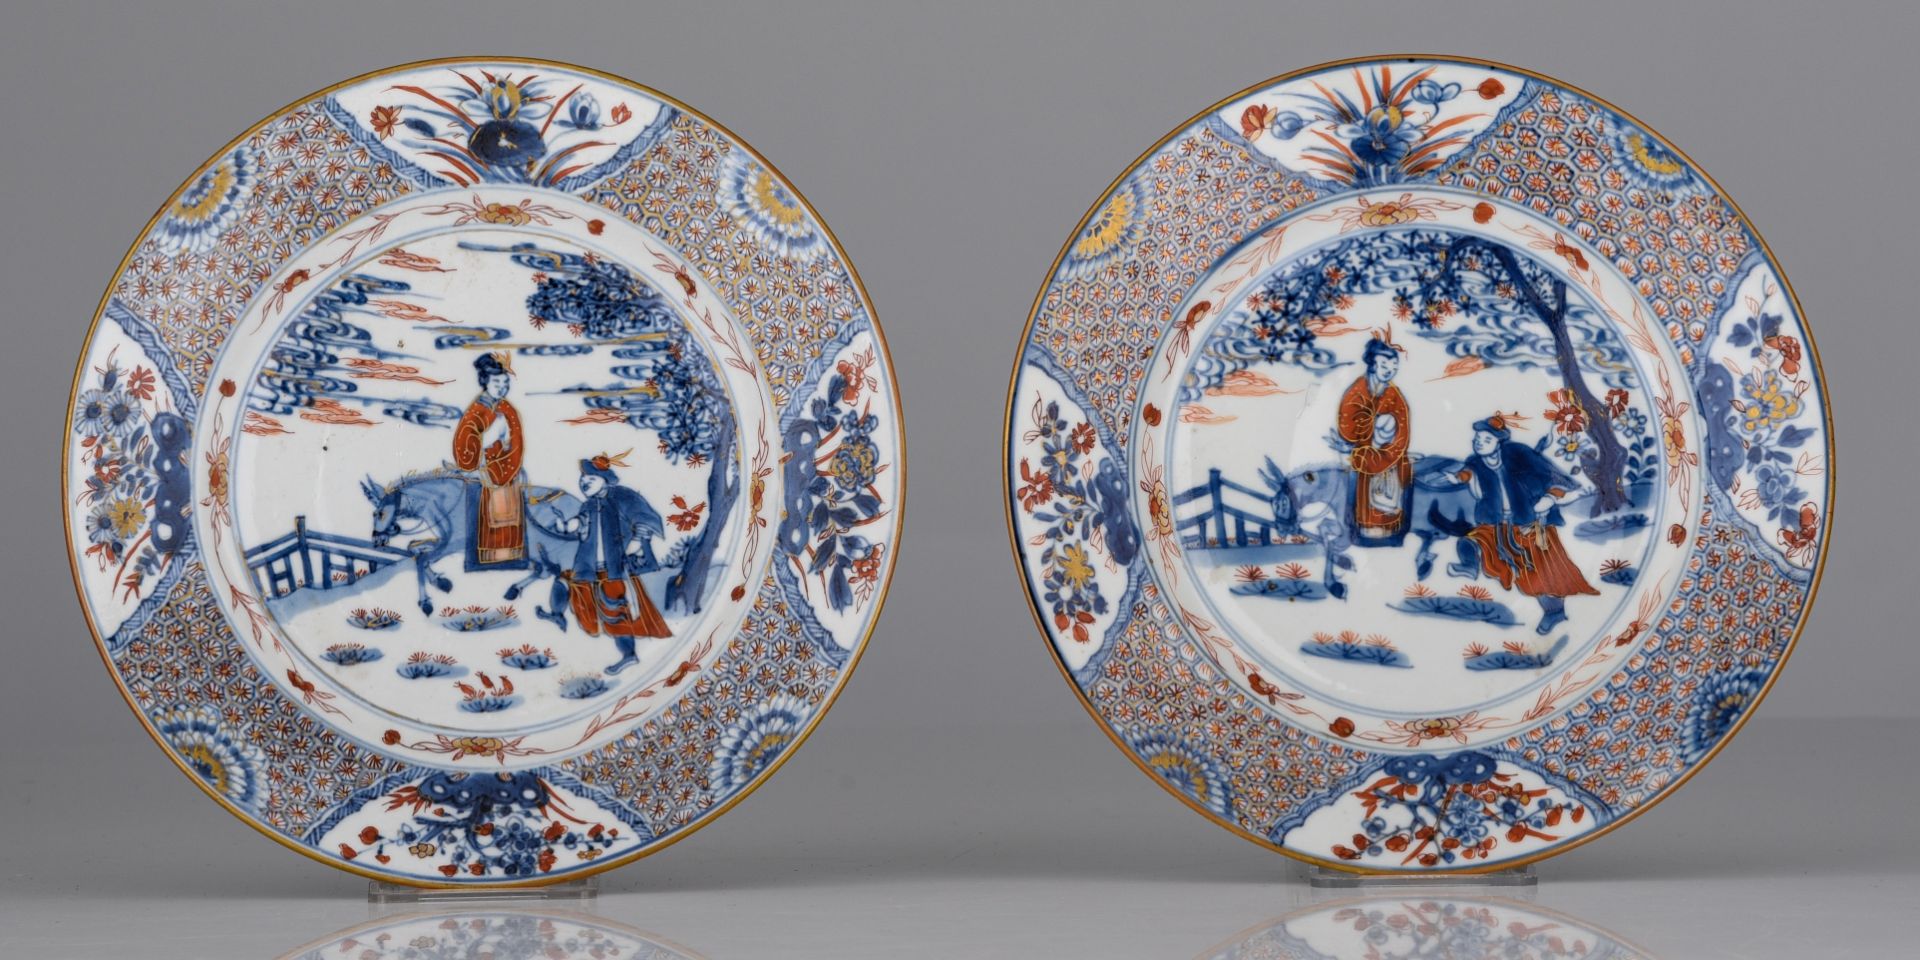 (BIDDING ONLY ON CARLOBONTE.BE) A collection of fine Chinese Imari figural export porcelain plates, - Image 6 of 10